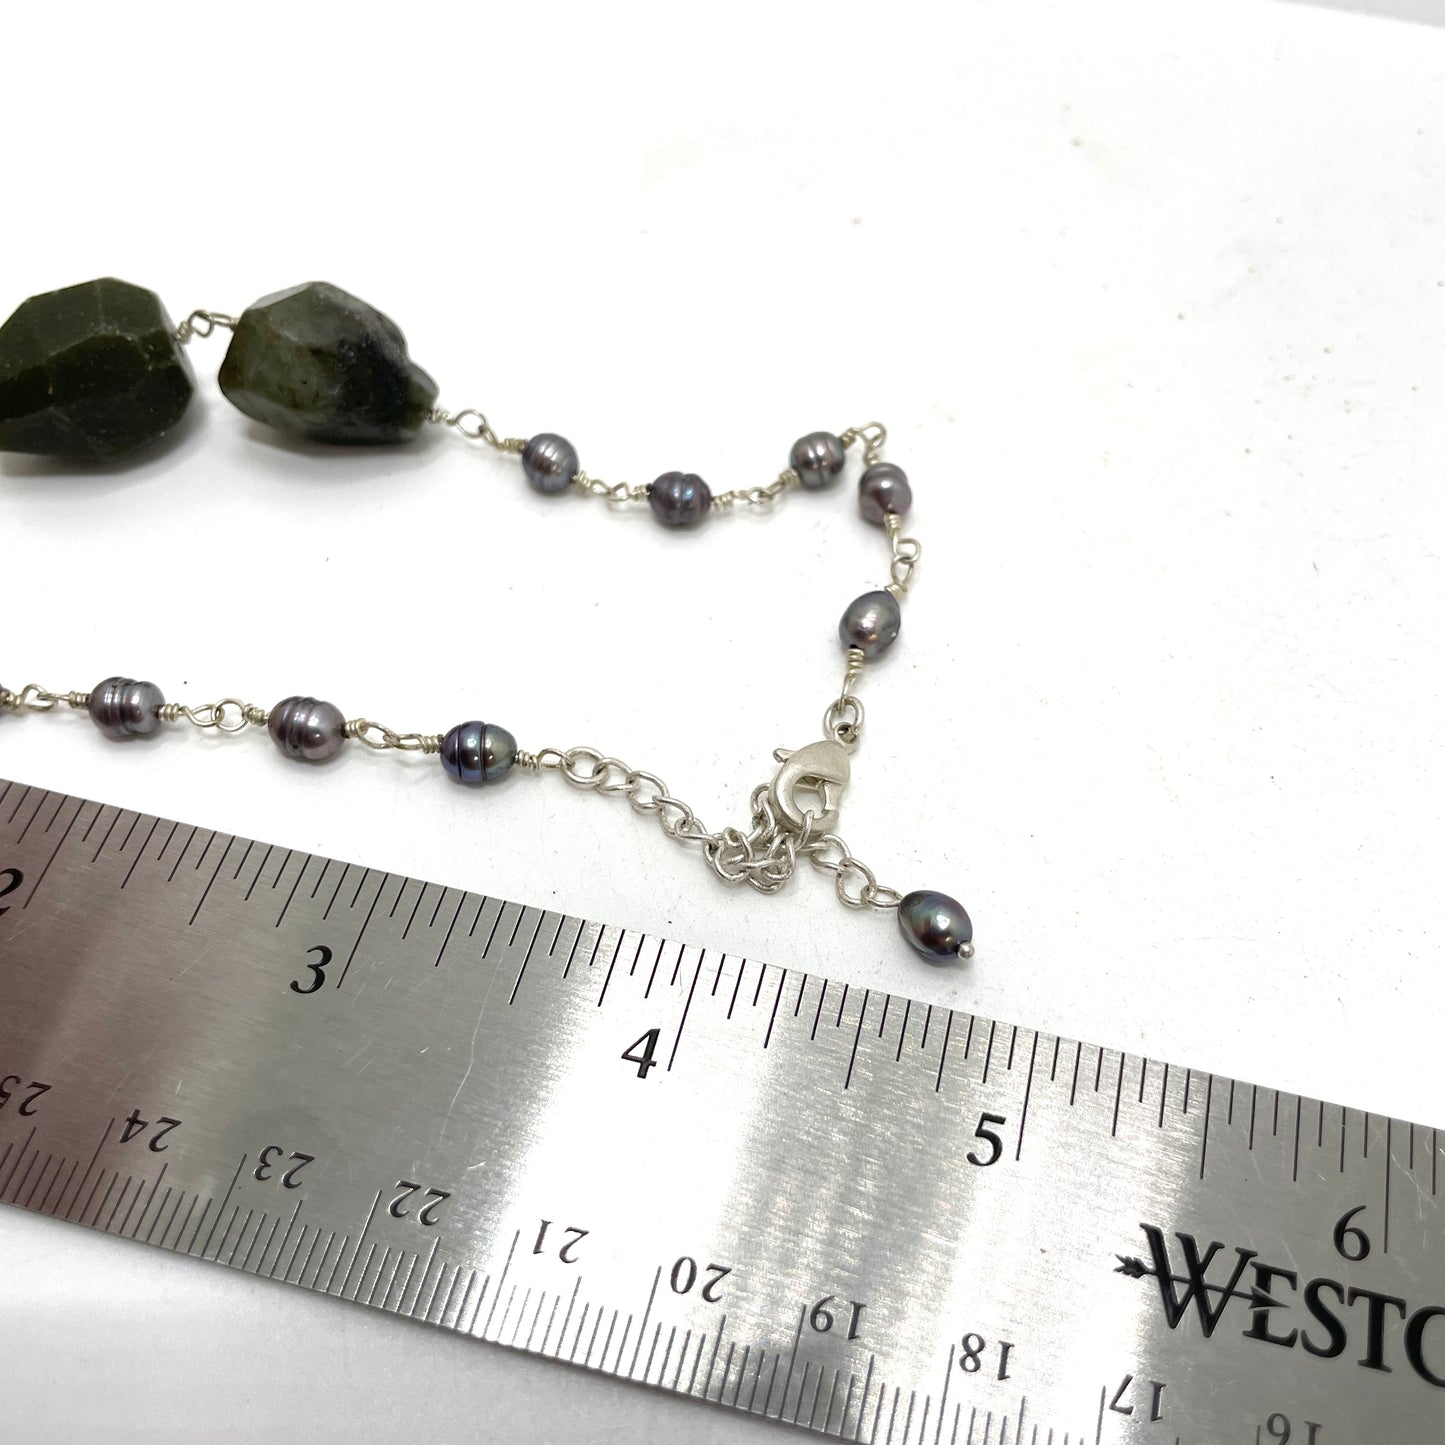 Green & Brown Stone Necklace with Seed Pearls